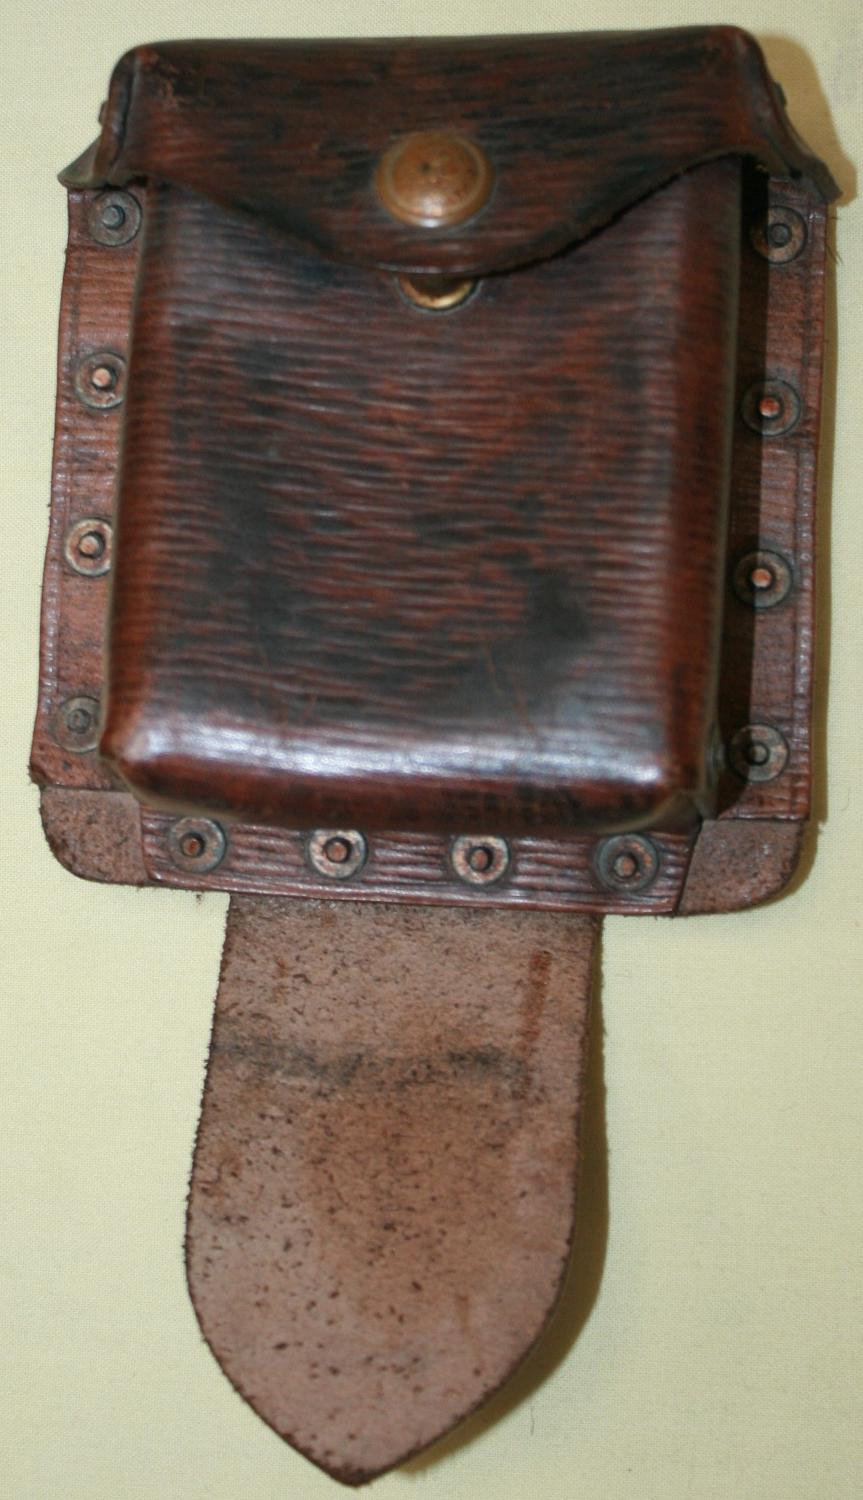 A 39 PATTERN LEATHER EQUIPMENT PISTOL AMMO POUCH WITH ITS REAR STRAP